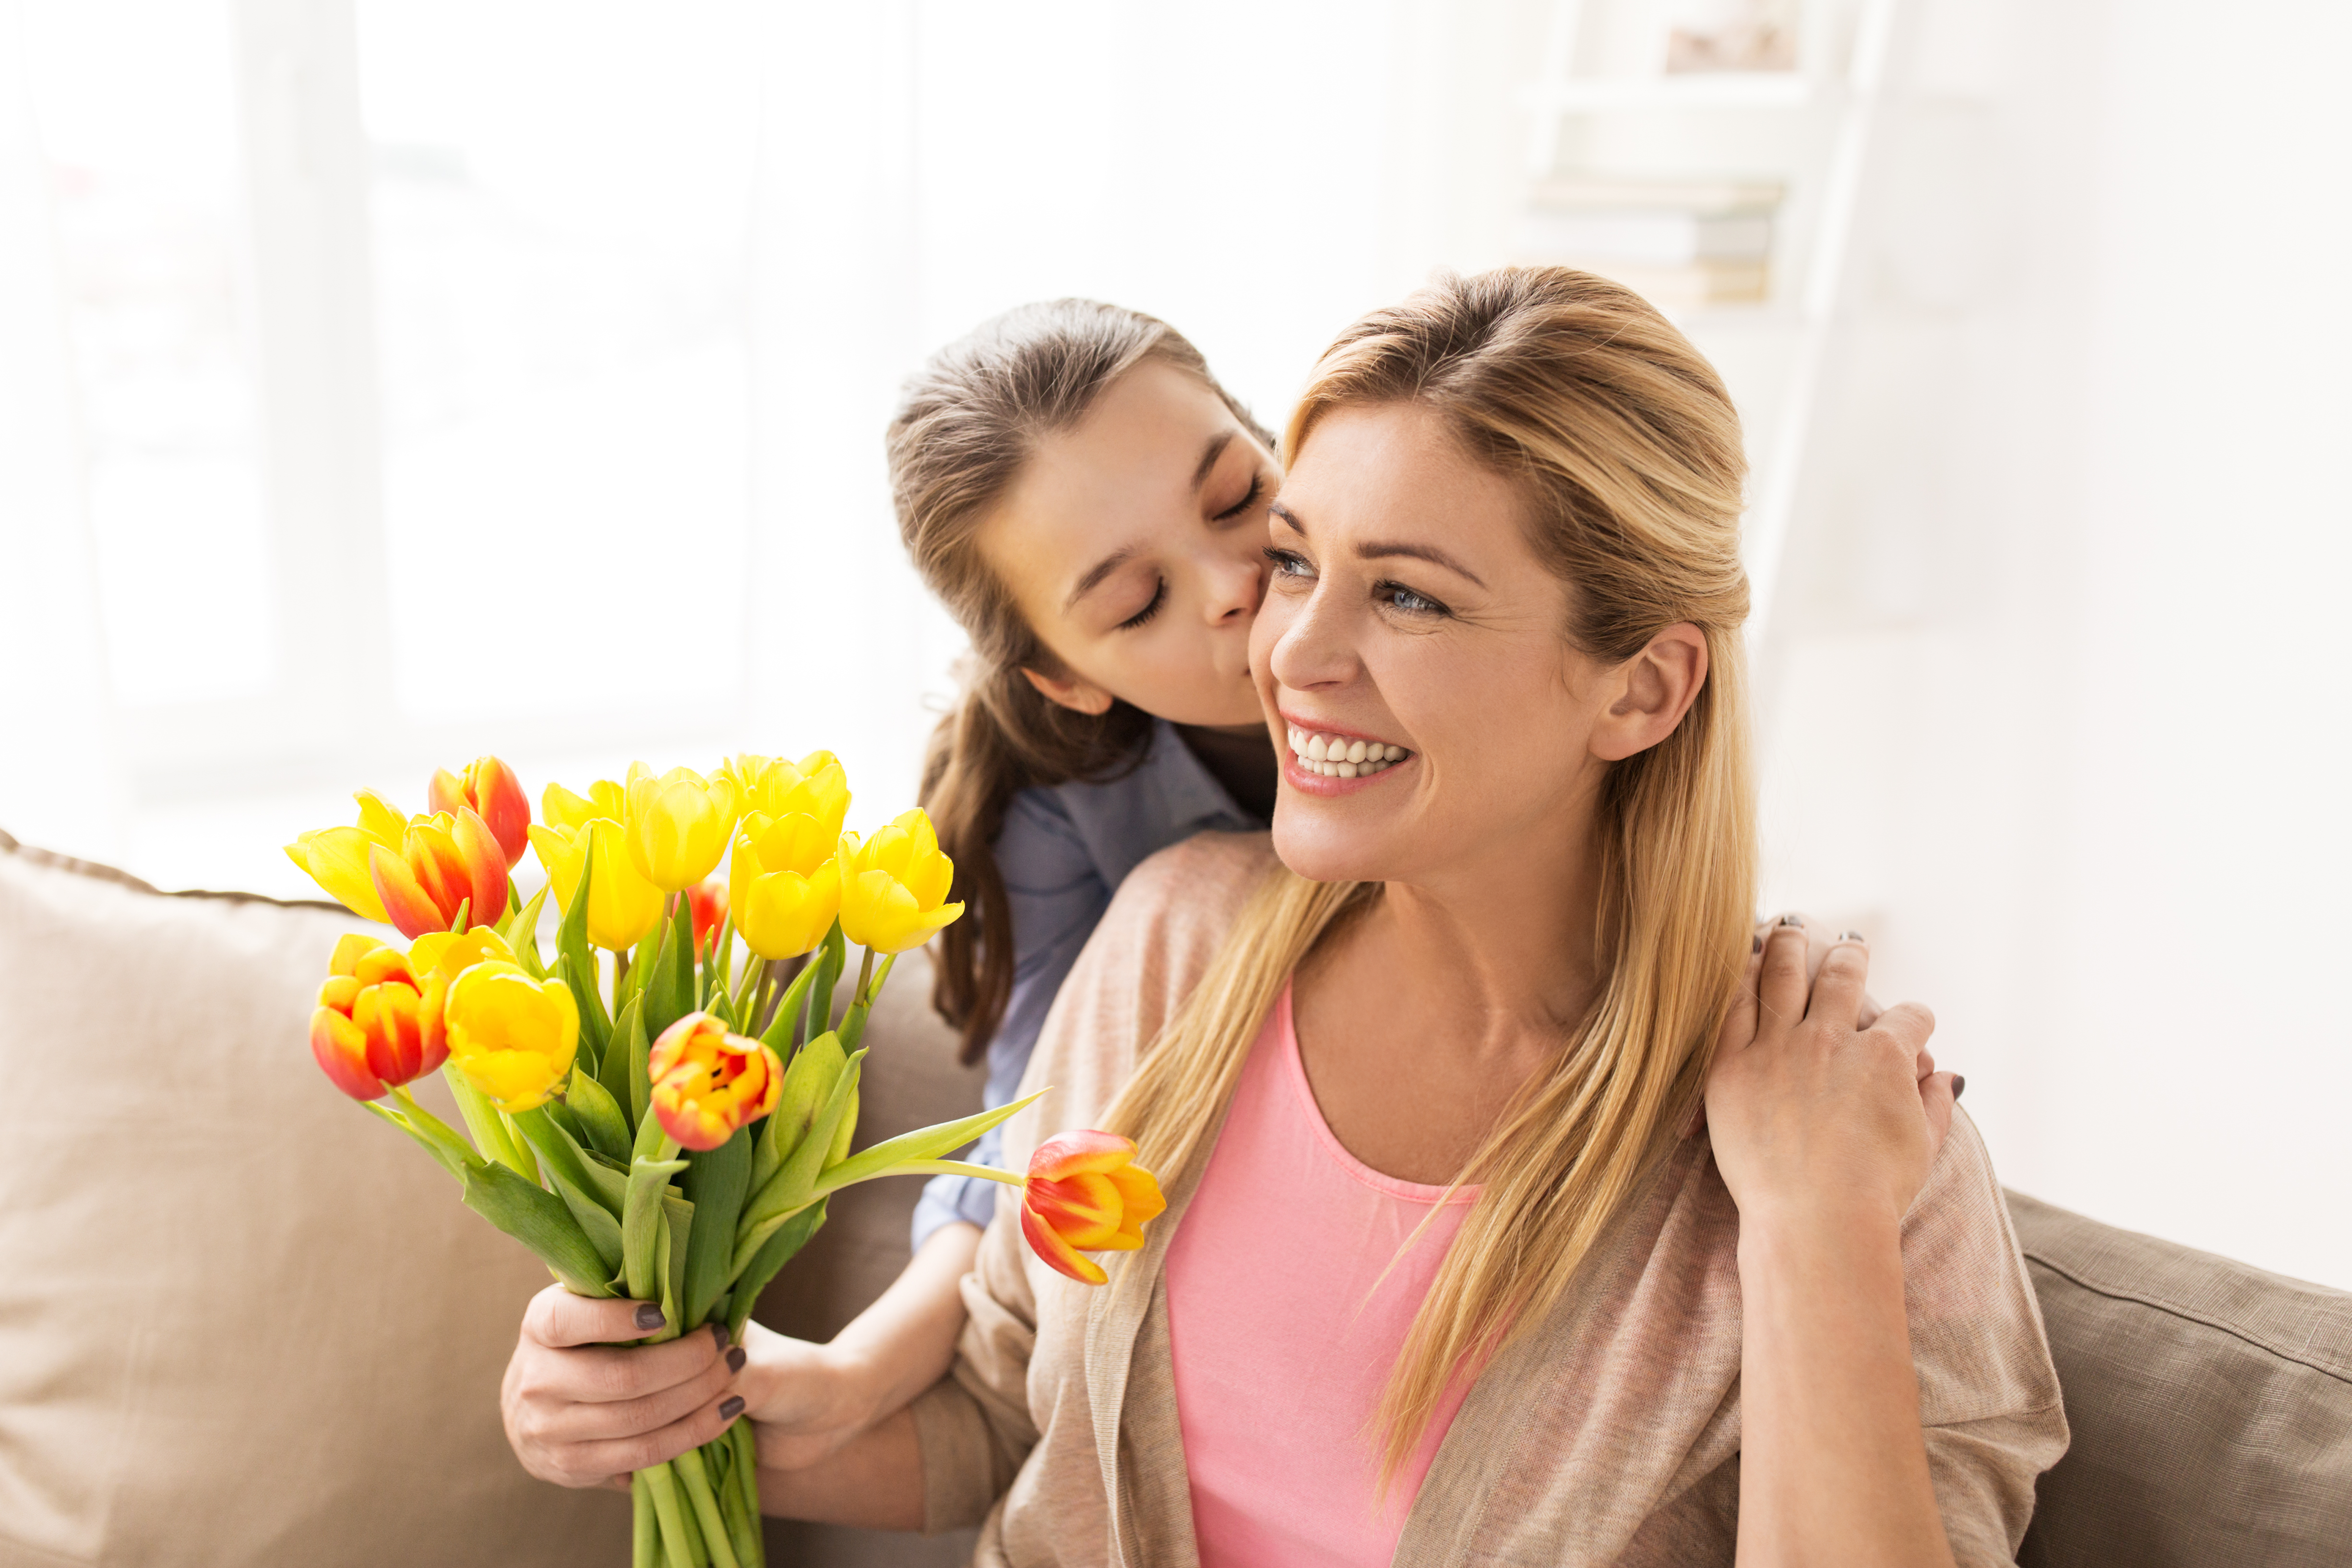 A teenage girl kisses her mother and gives her flowers | Source: Shutterstock